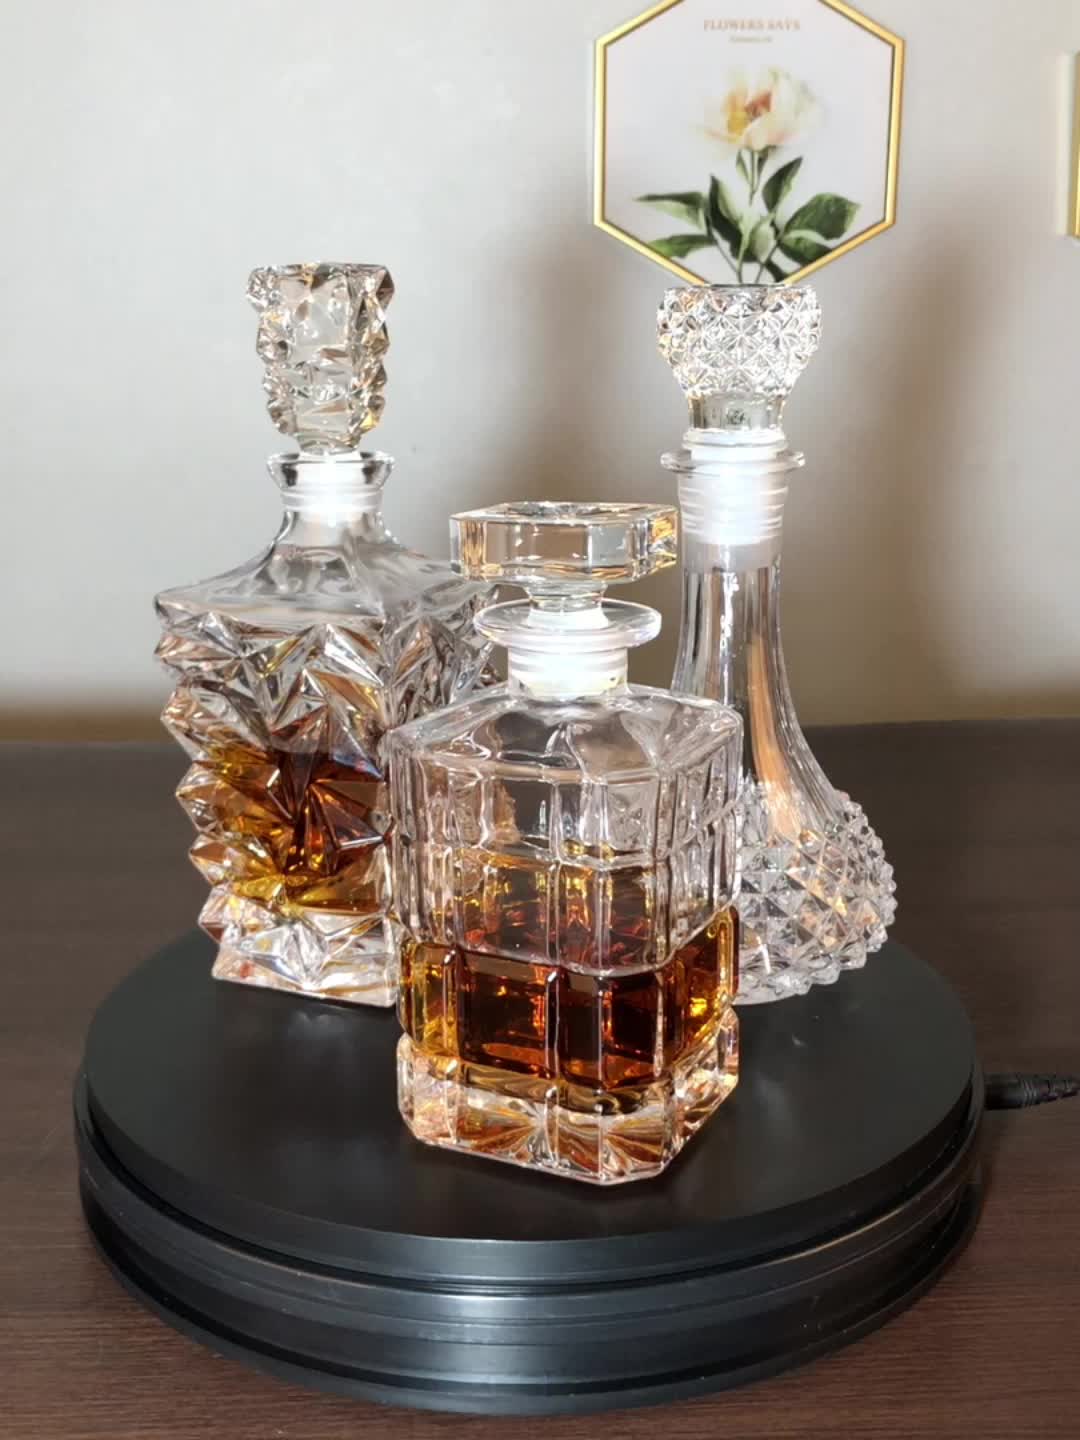 Whiskey Decanter With Glass Stopper ,26 oz Liquor Decanter For